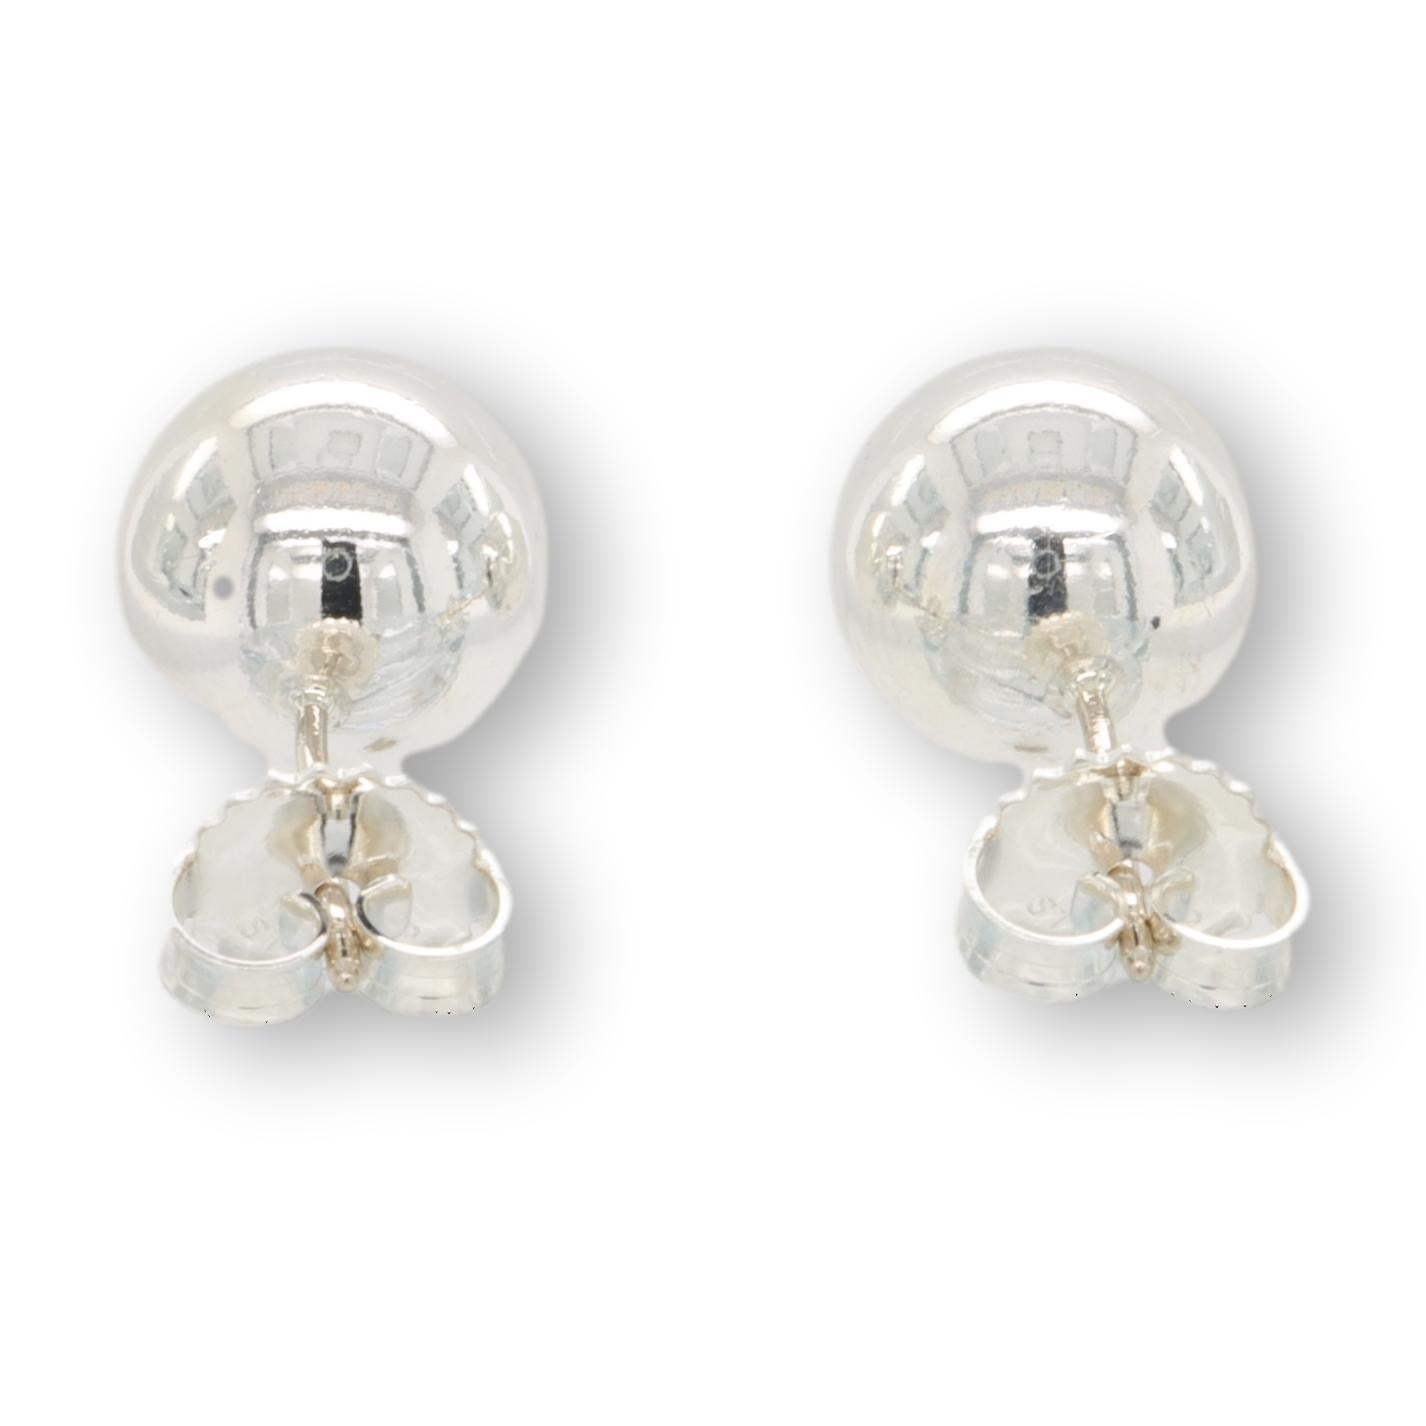 Tiffany & Co. ball stud earrings from the Hardware collection finely crafted in sterling silver measuring 10mm each. Posts with butterfly backs. Hallmarks are faded. 10mm each earring

Earrings Specifications
Brand: Tiffany & Co.
Hallmarks: